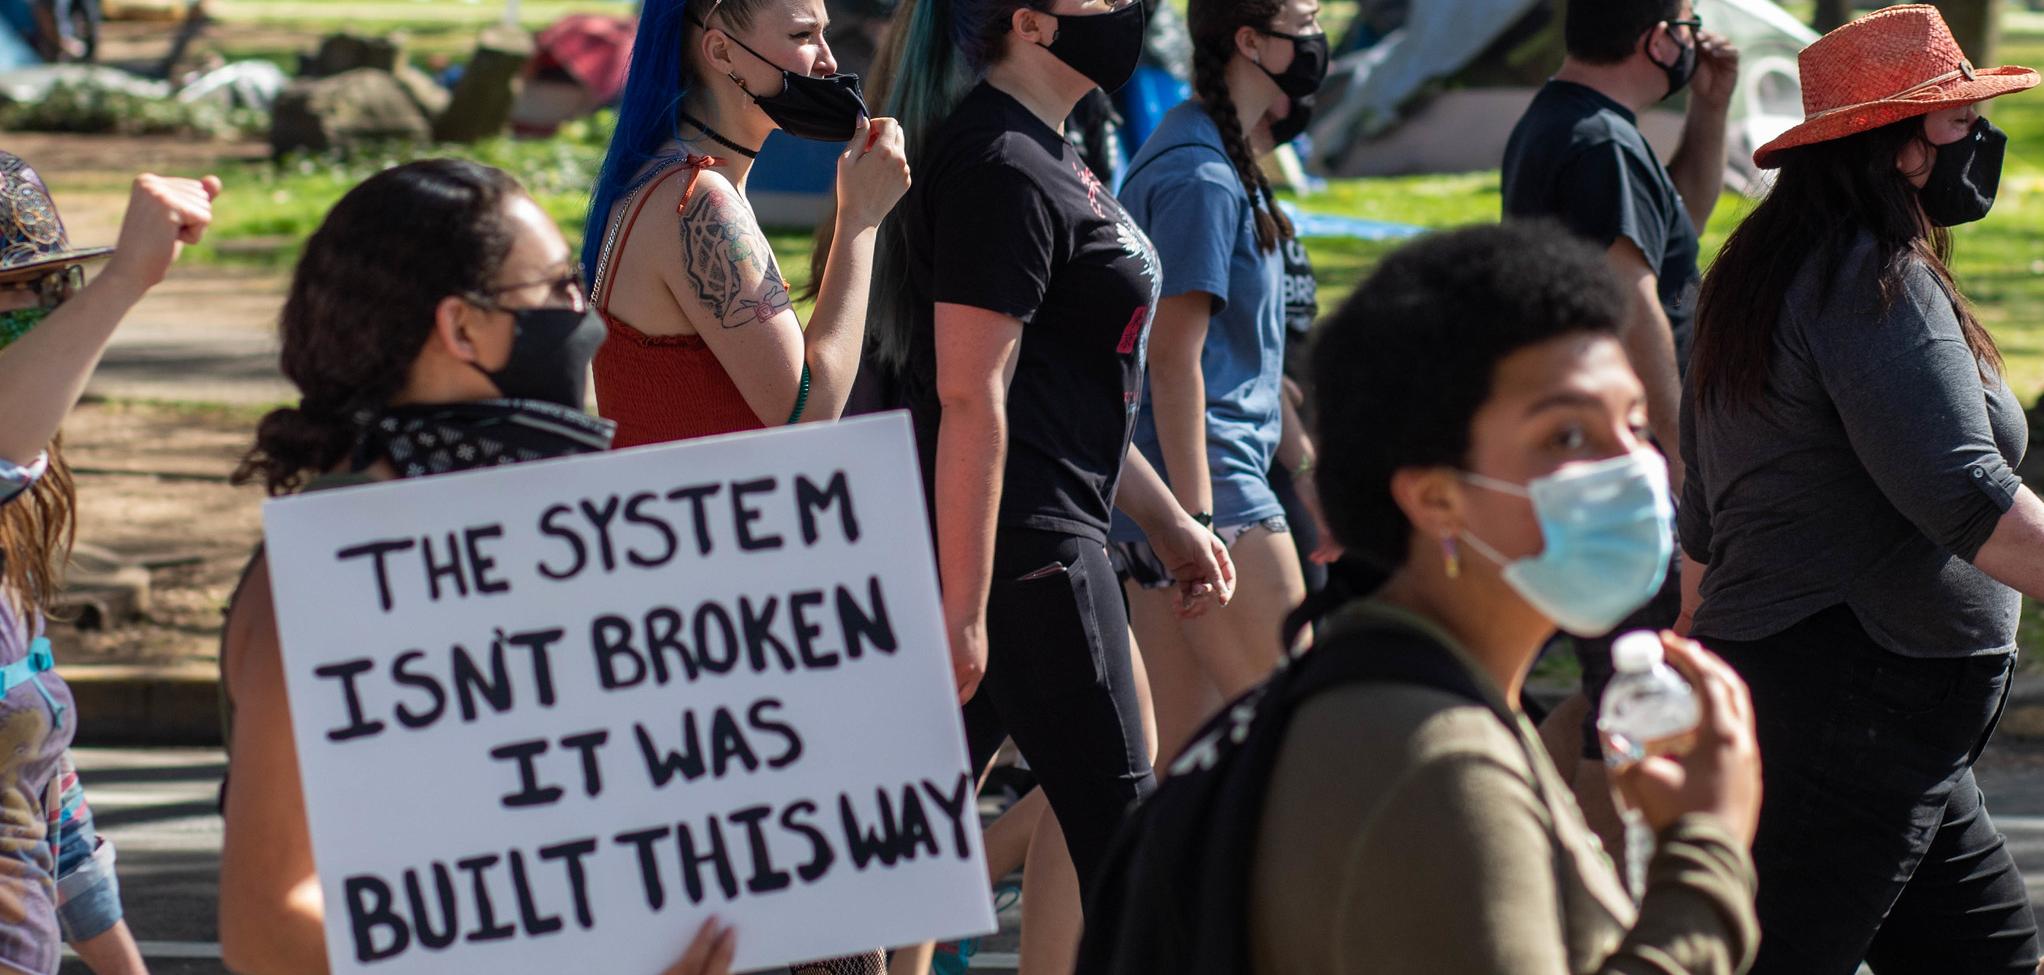 Protesters wearing masks. One protester holding a sign that says "The system isn't broken it was built this way."